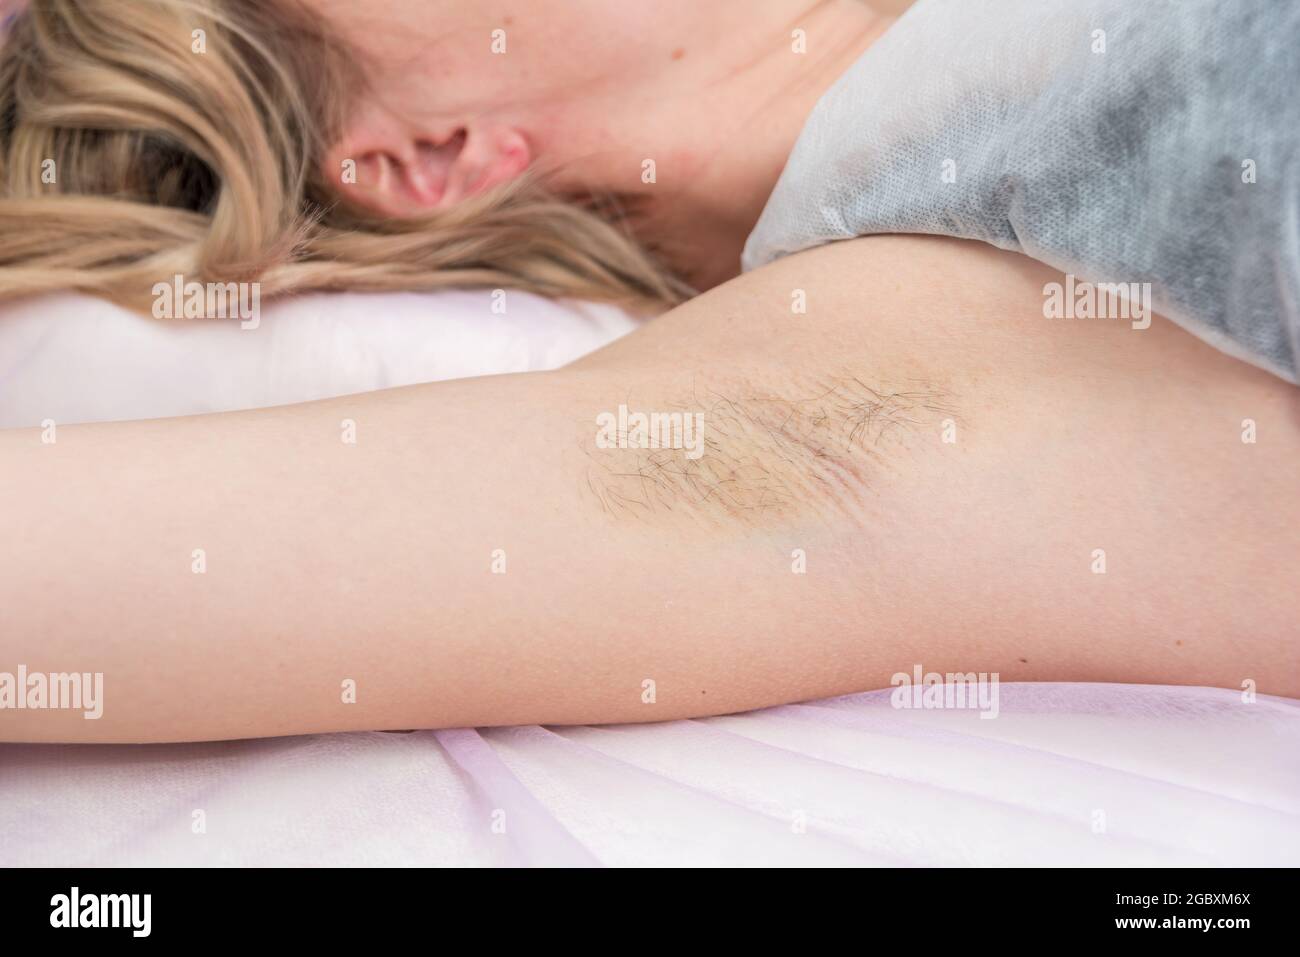 Girl is ready for depilation of her armpits in spa salon Stock Photo